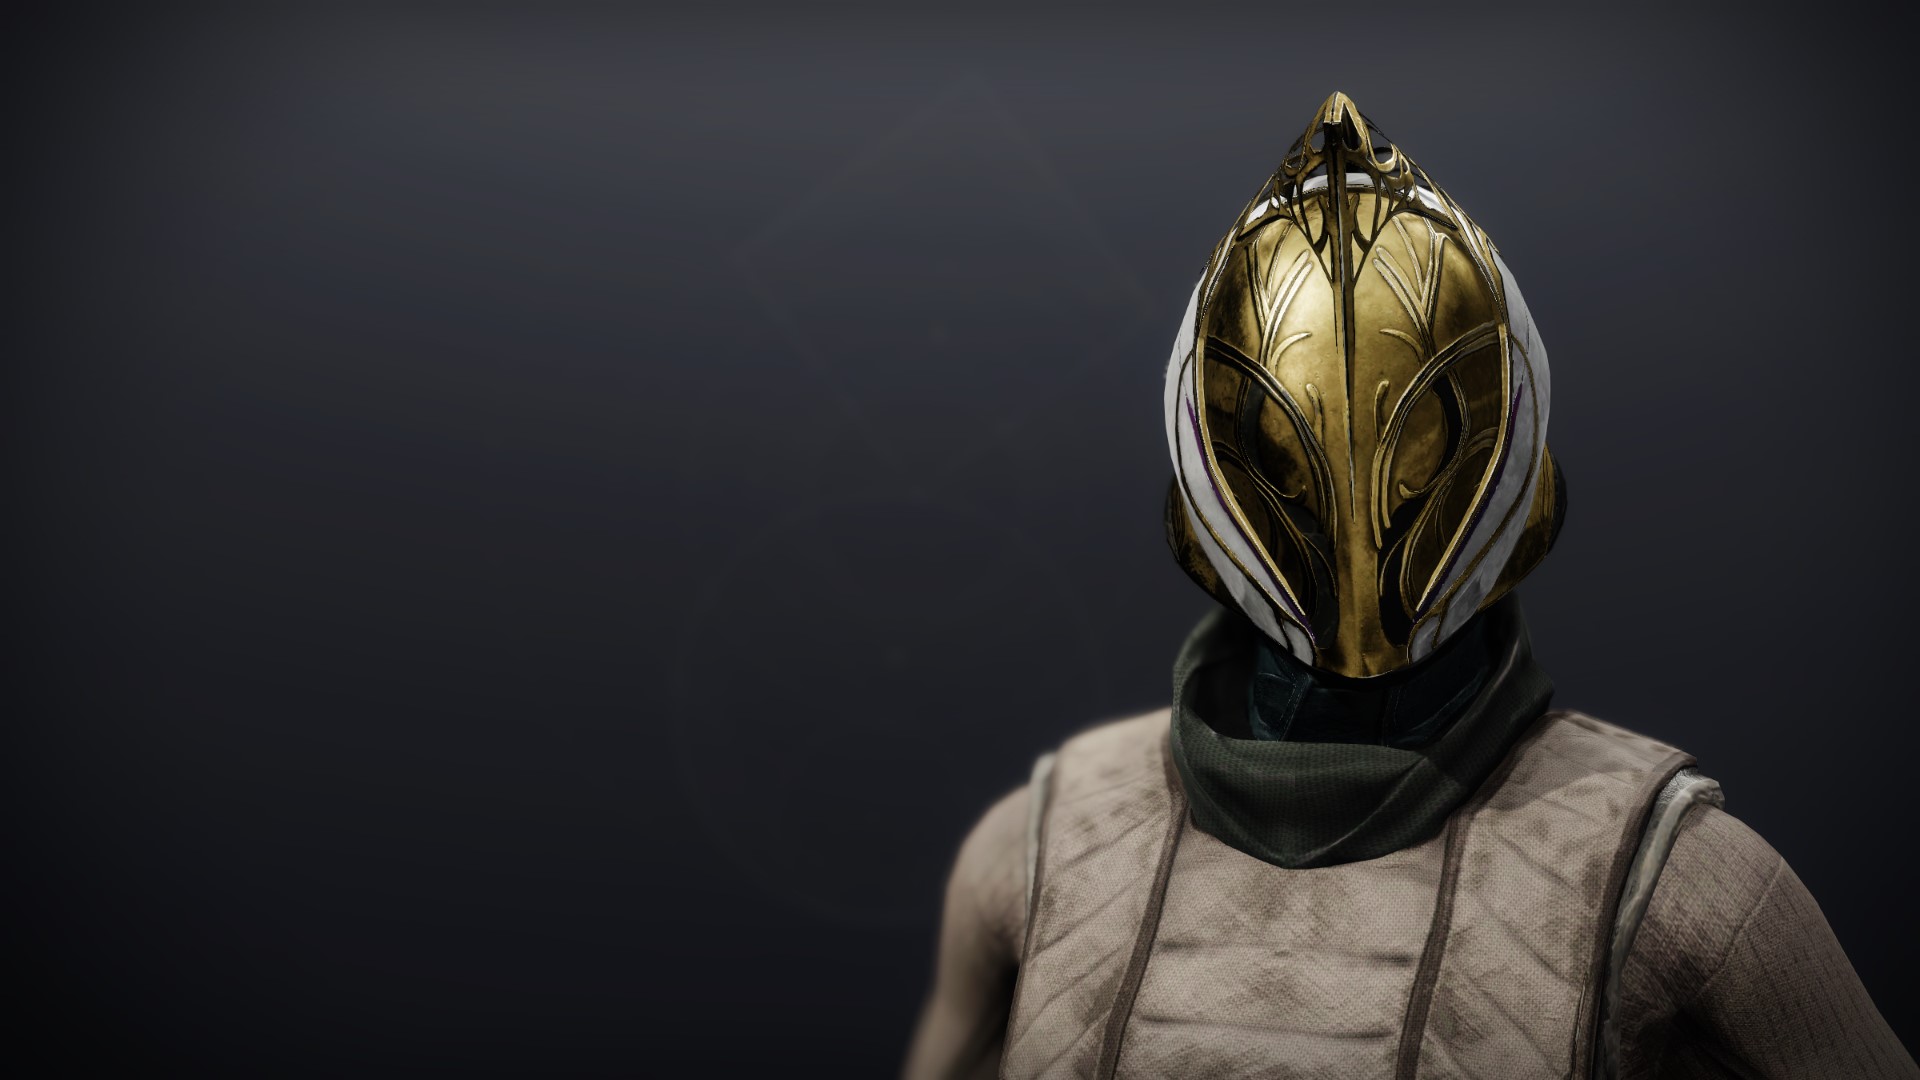 An in-game render of the Celestine Hood (Magnificent).